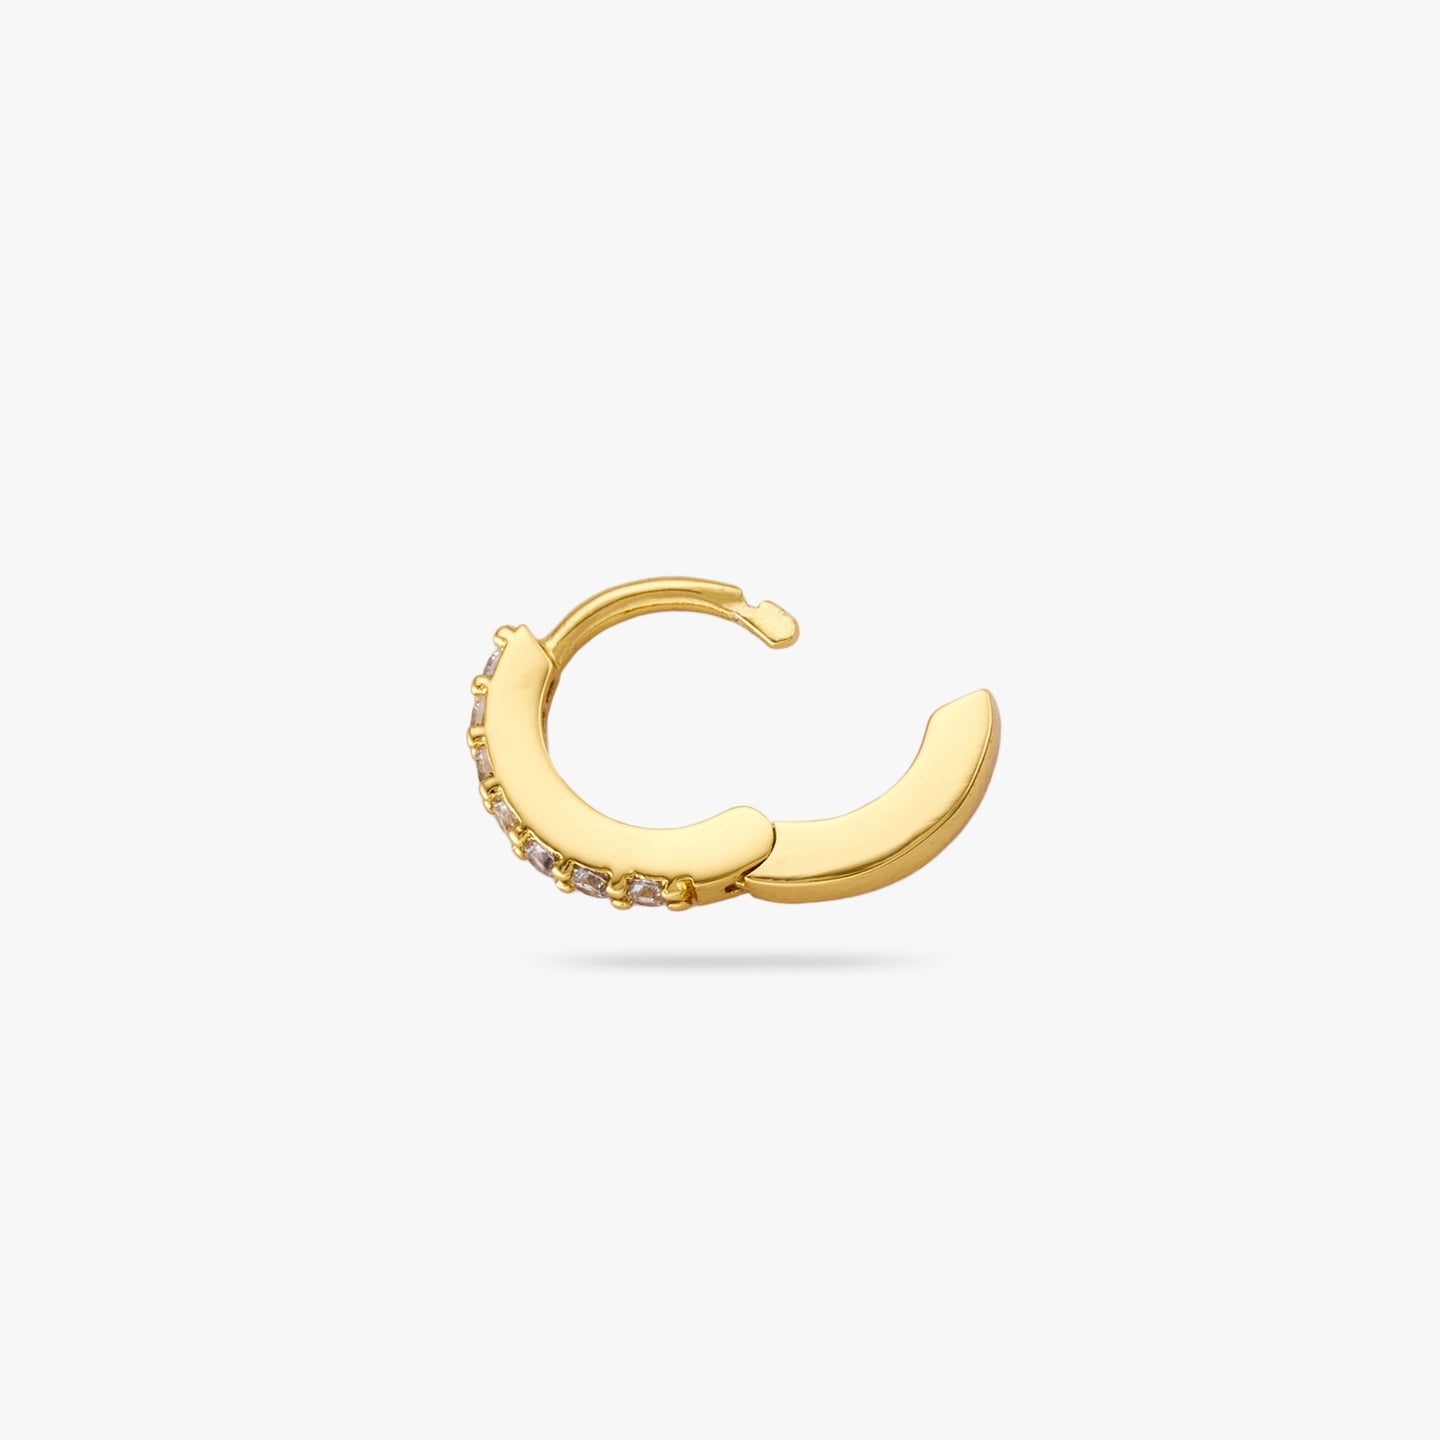 A clear/gold micro pave huggie with a 6mm inner diameter and the clasp undone color:null|gold/clear